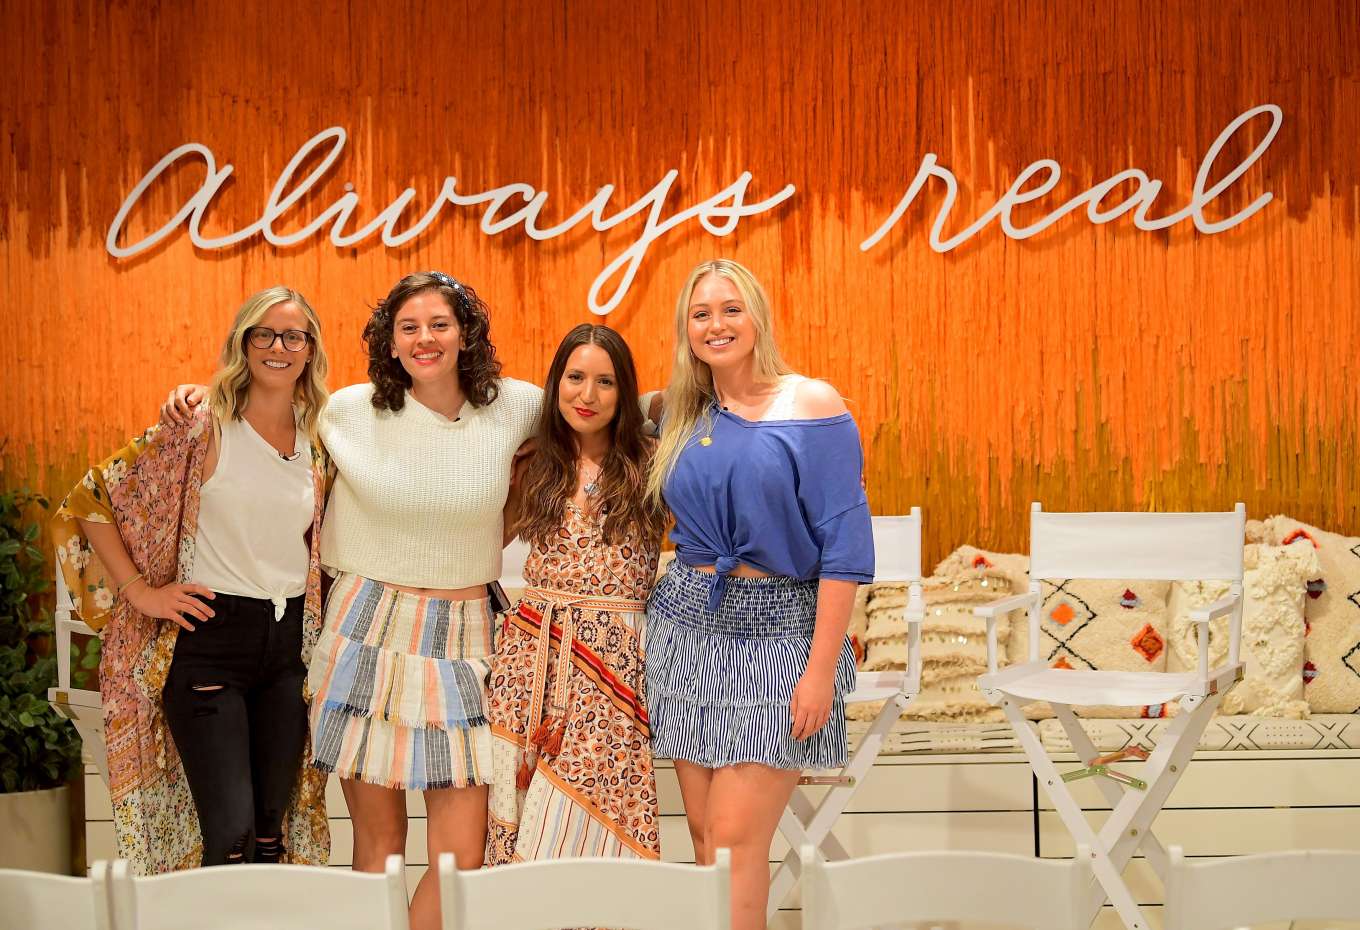 Iskra Lawrence â€“ Hosting an Aerie Real Talk Q&A Session with inspiring women in NY